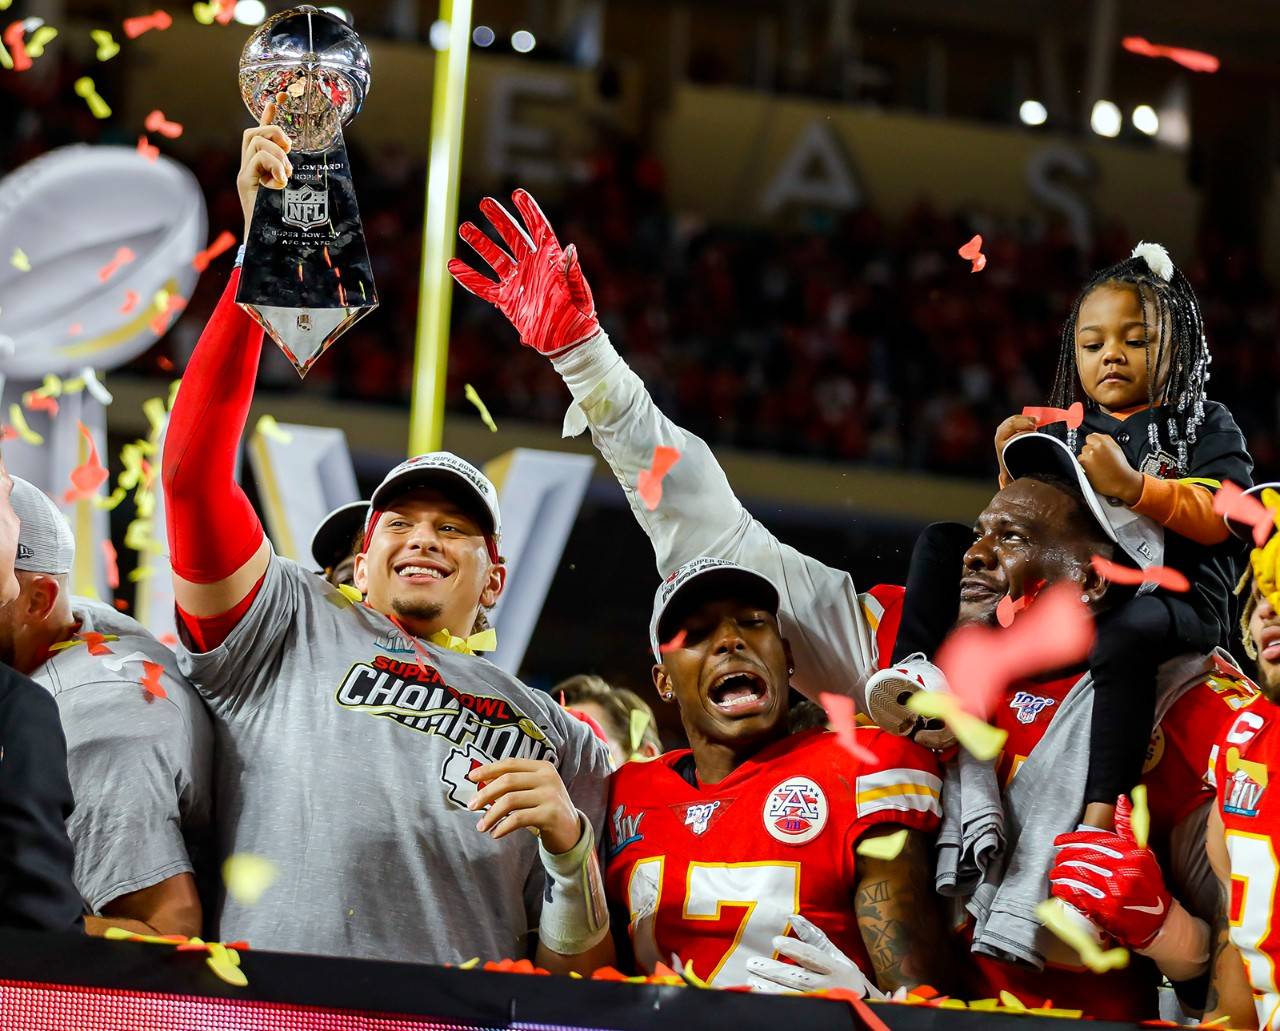 WATCH: Chiefs return to Kansas City with Lombardi Trophy after Super Bowl  win - ABC17NEWS